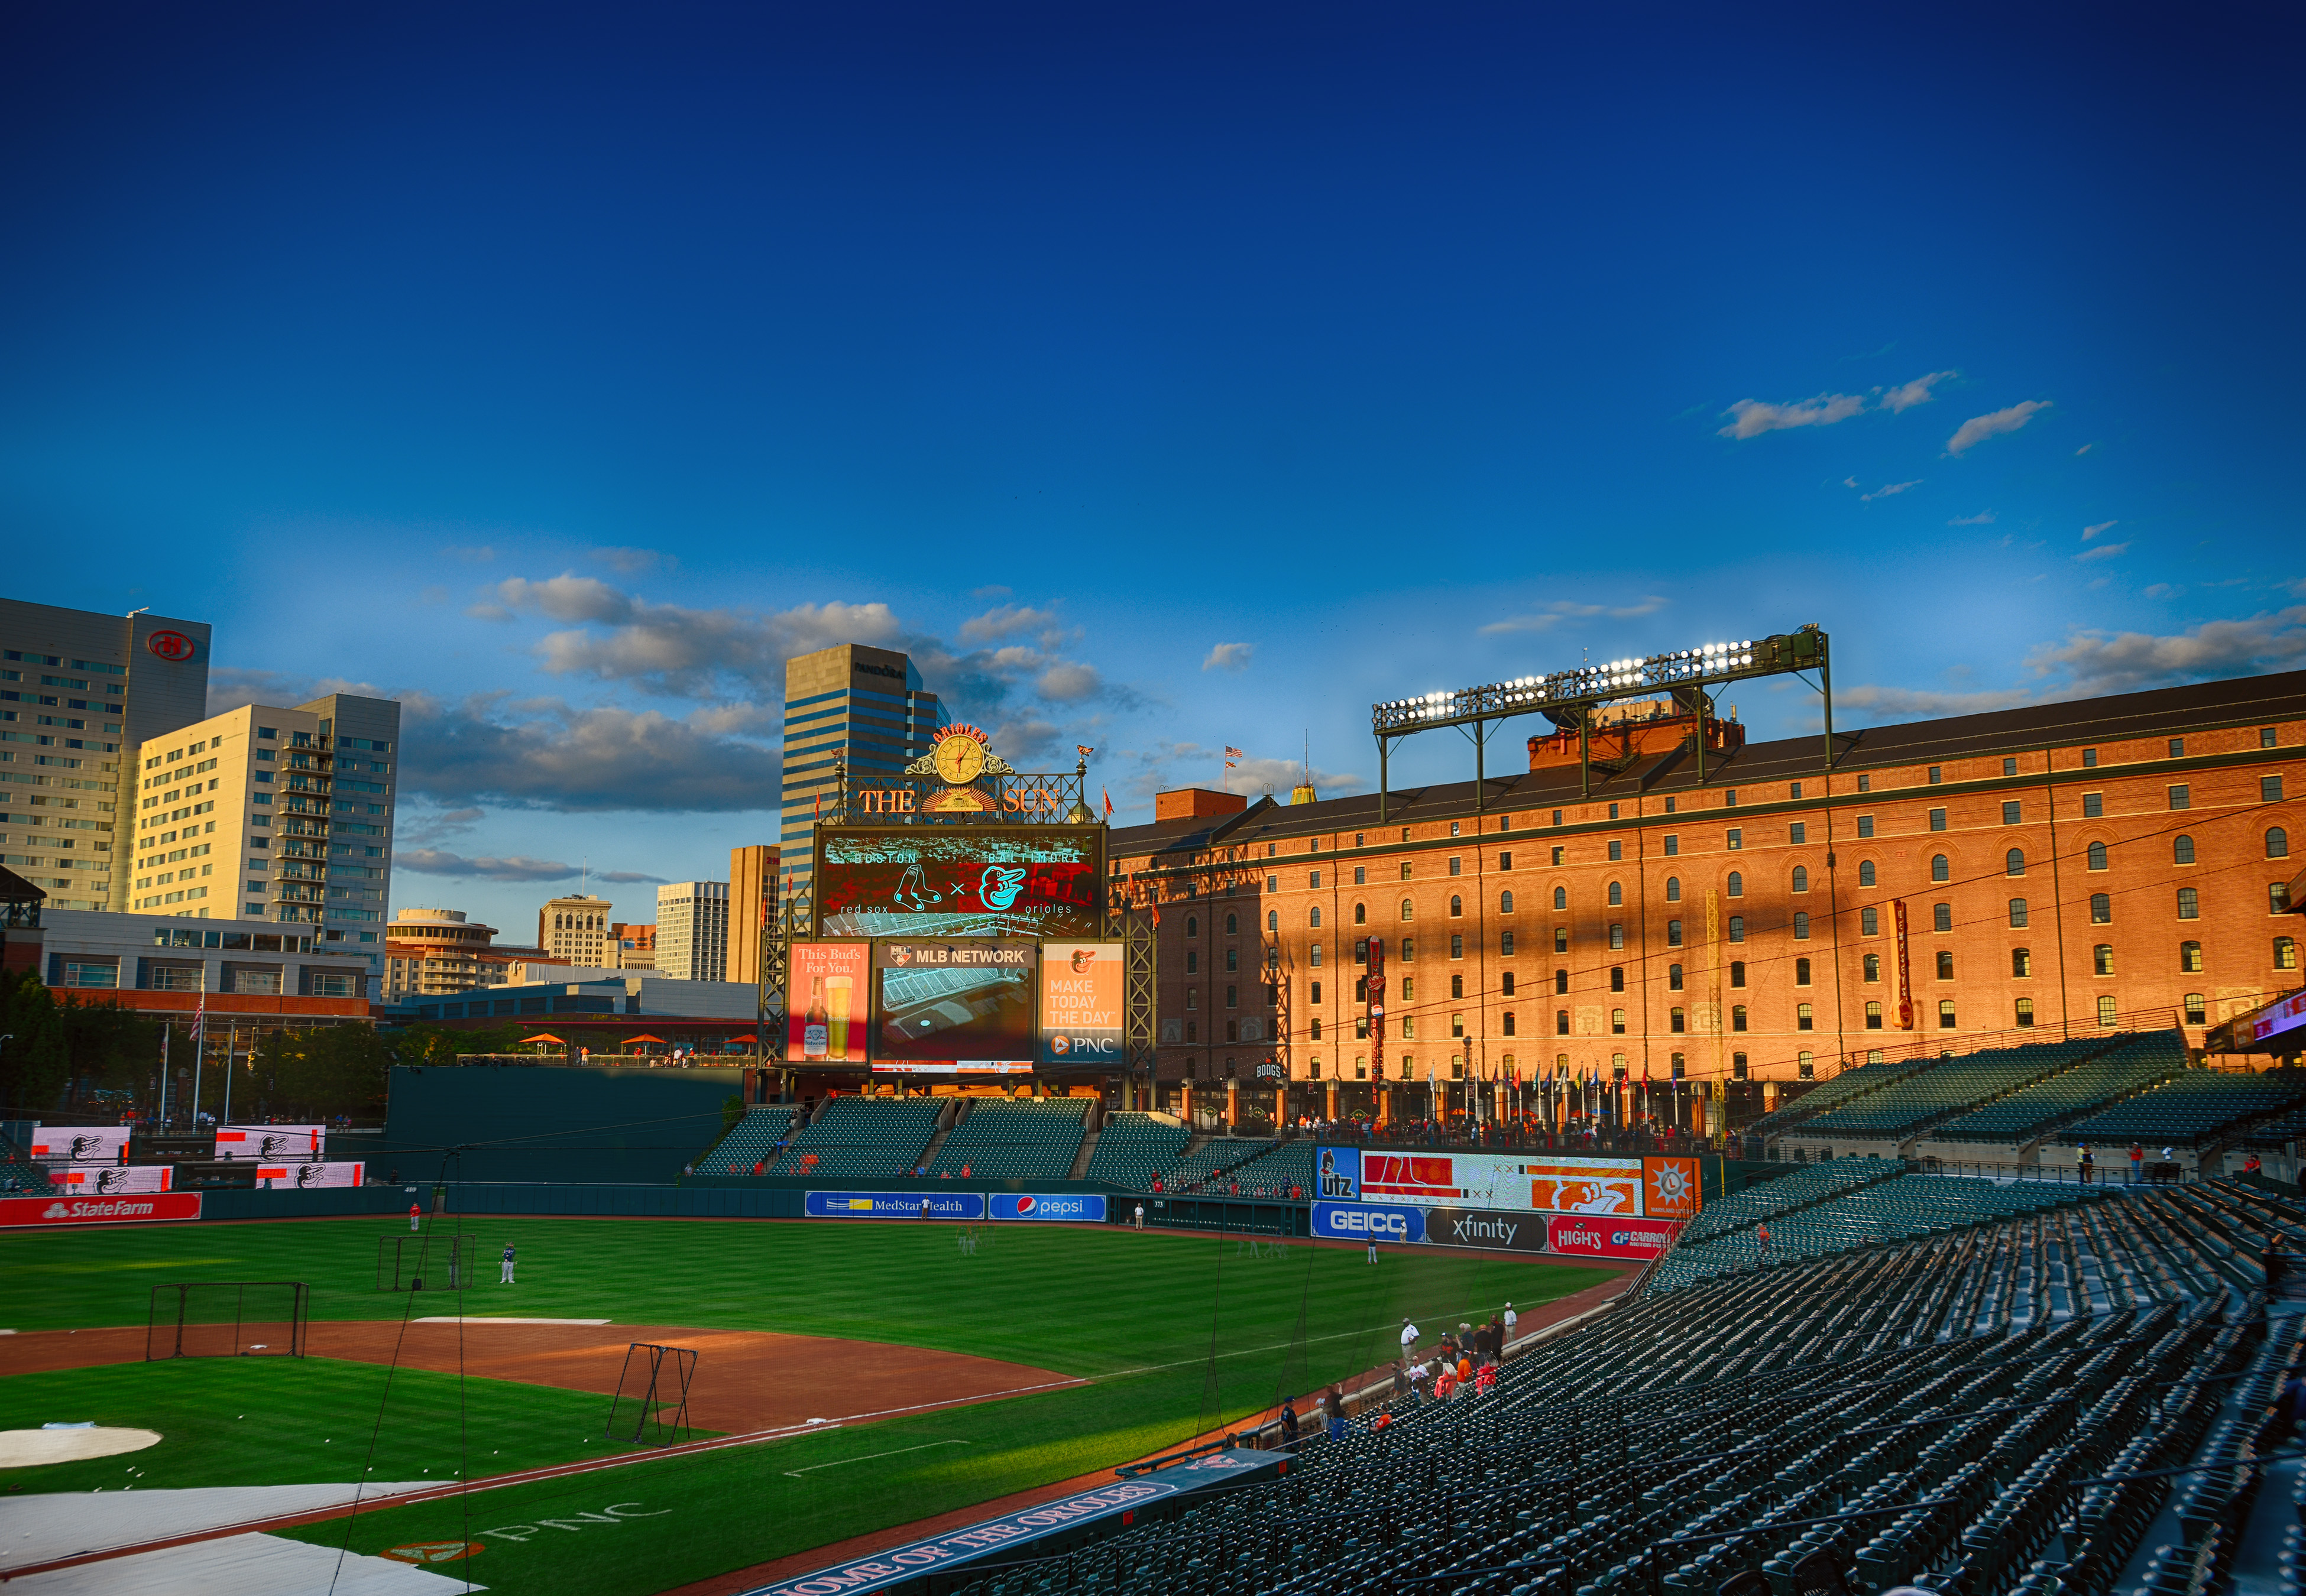 How Camden Yards changes will affect hitters